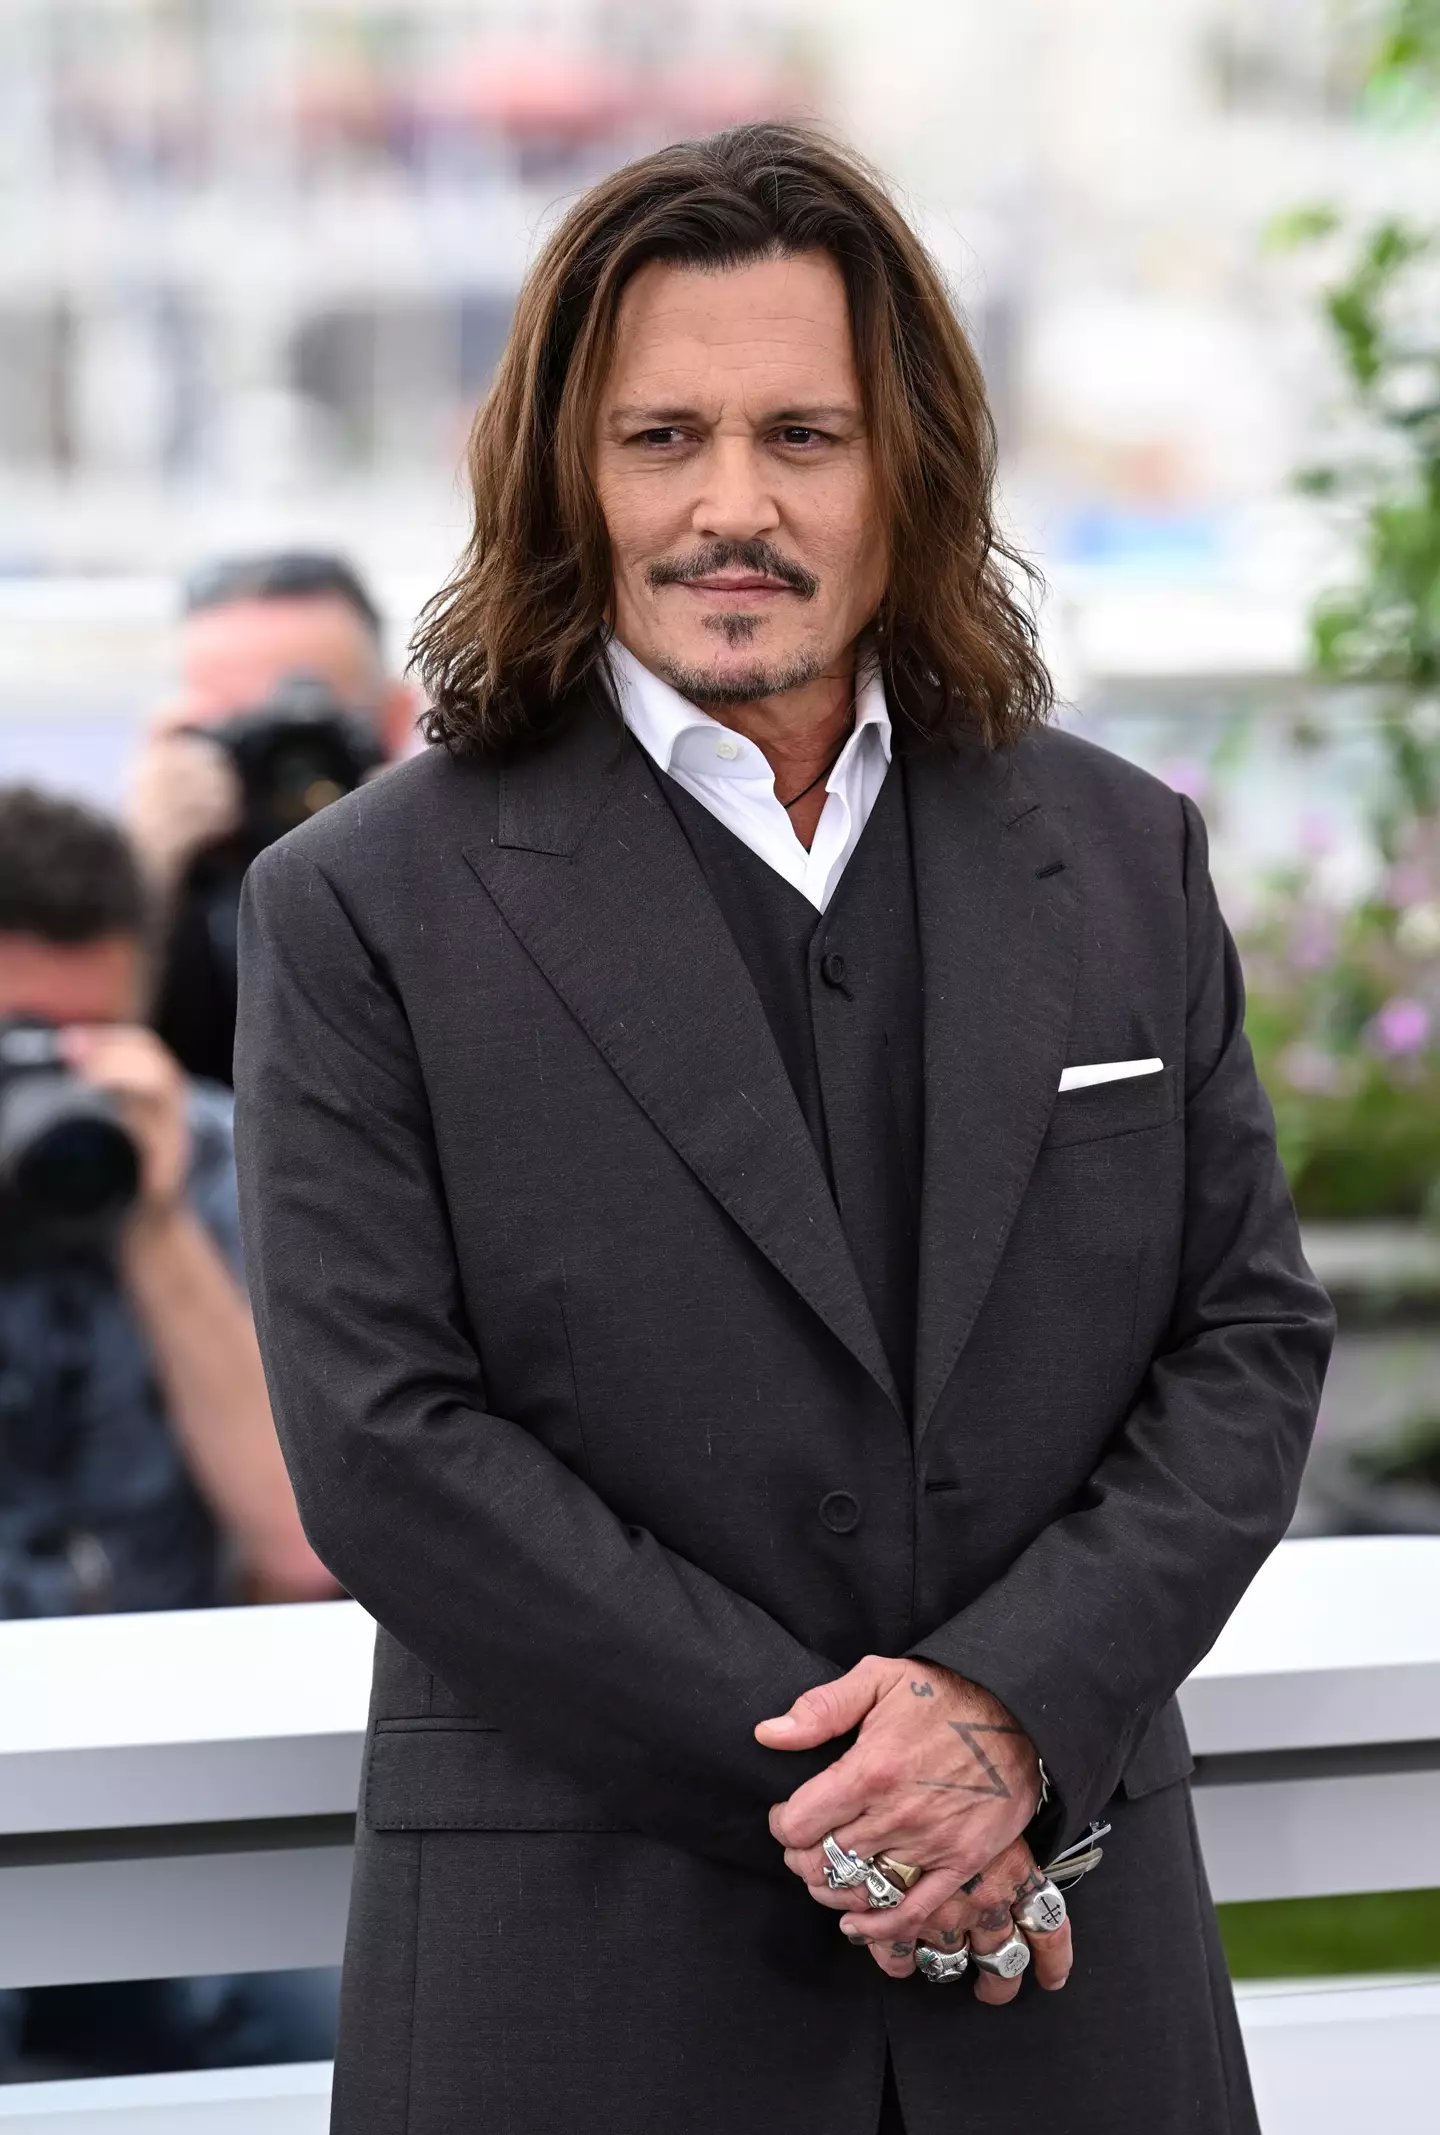 Depp previously said he would not return to Pirates of the Caribbean.